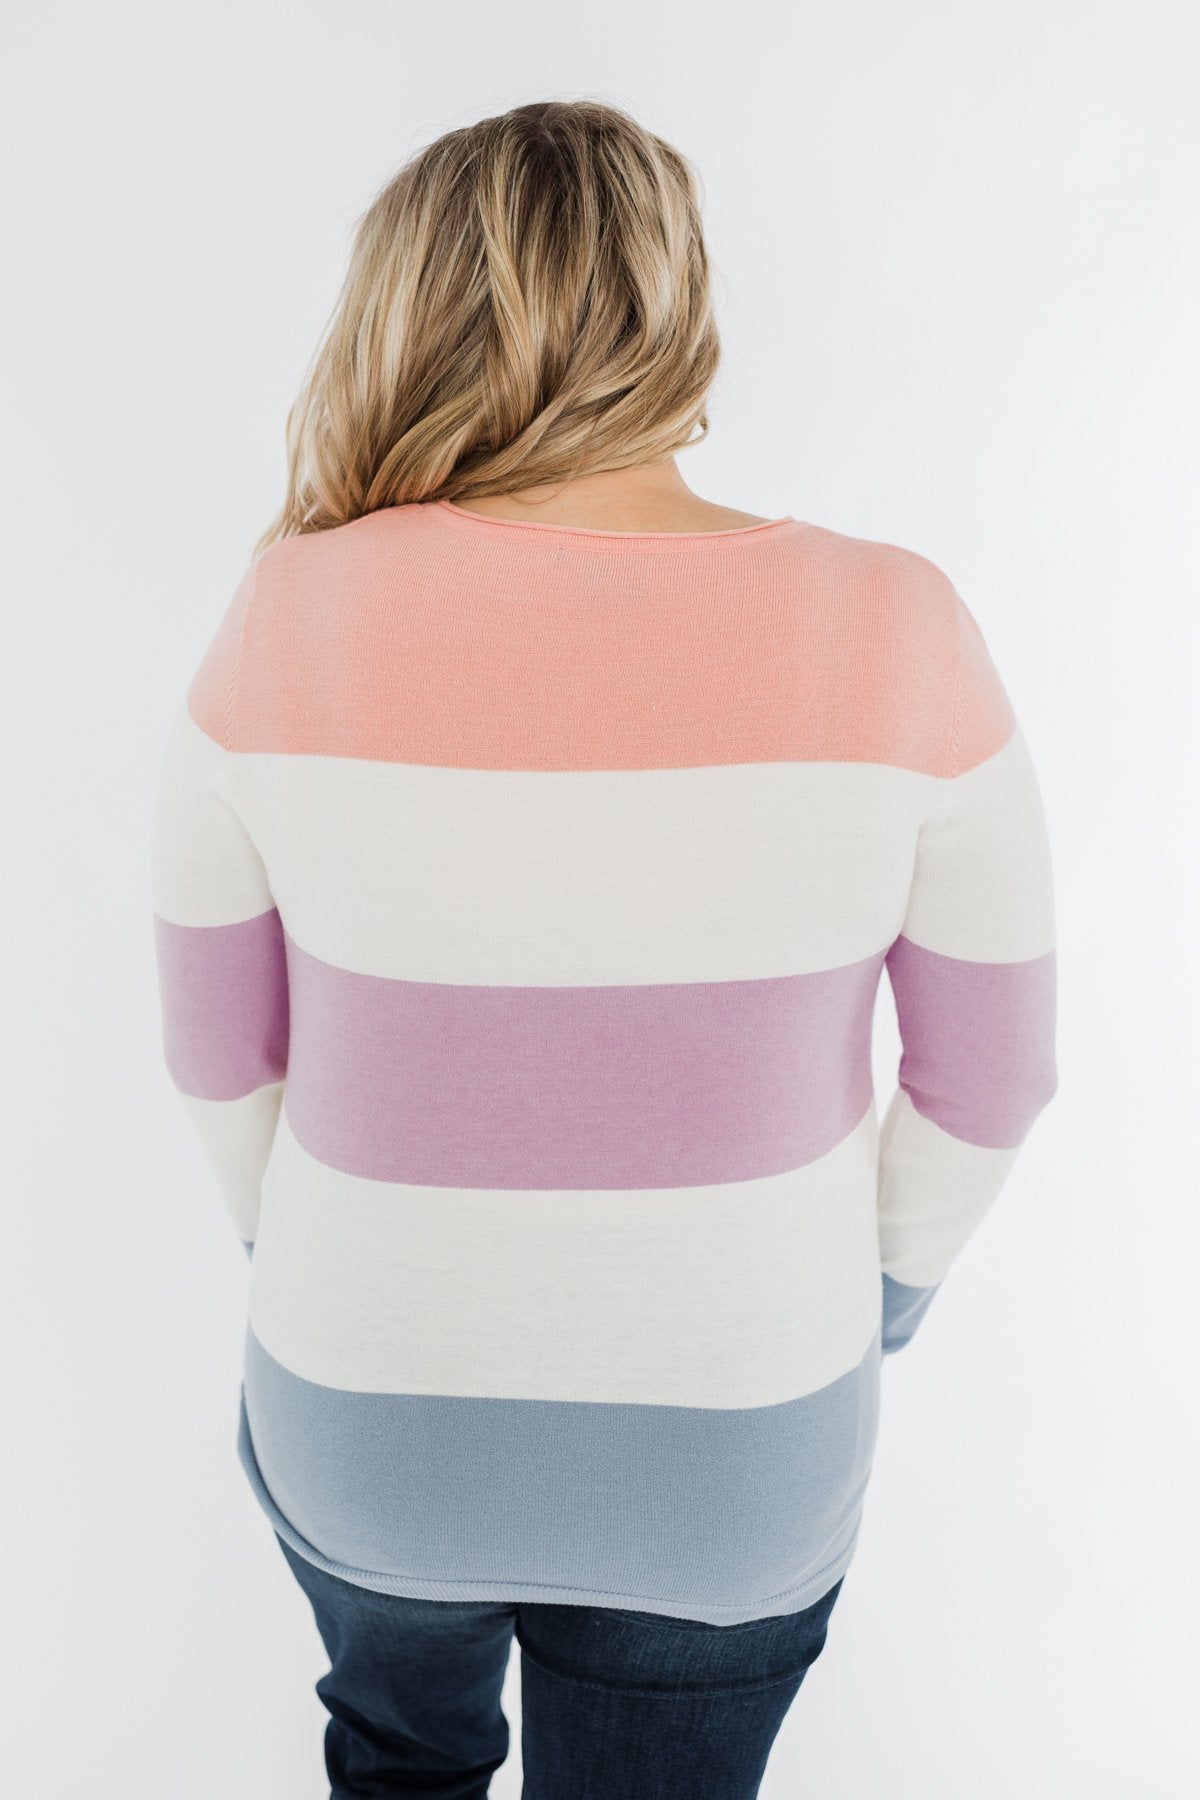 Here She Comes Sweater- Peach, Orchid & Steal Blue